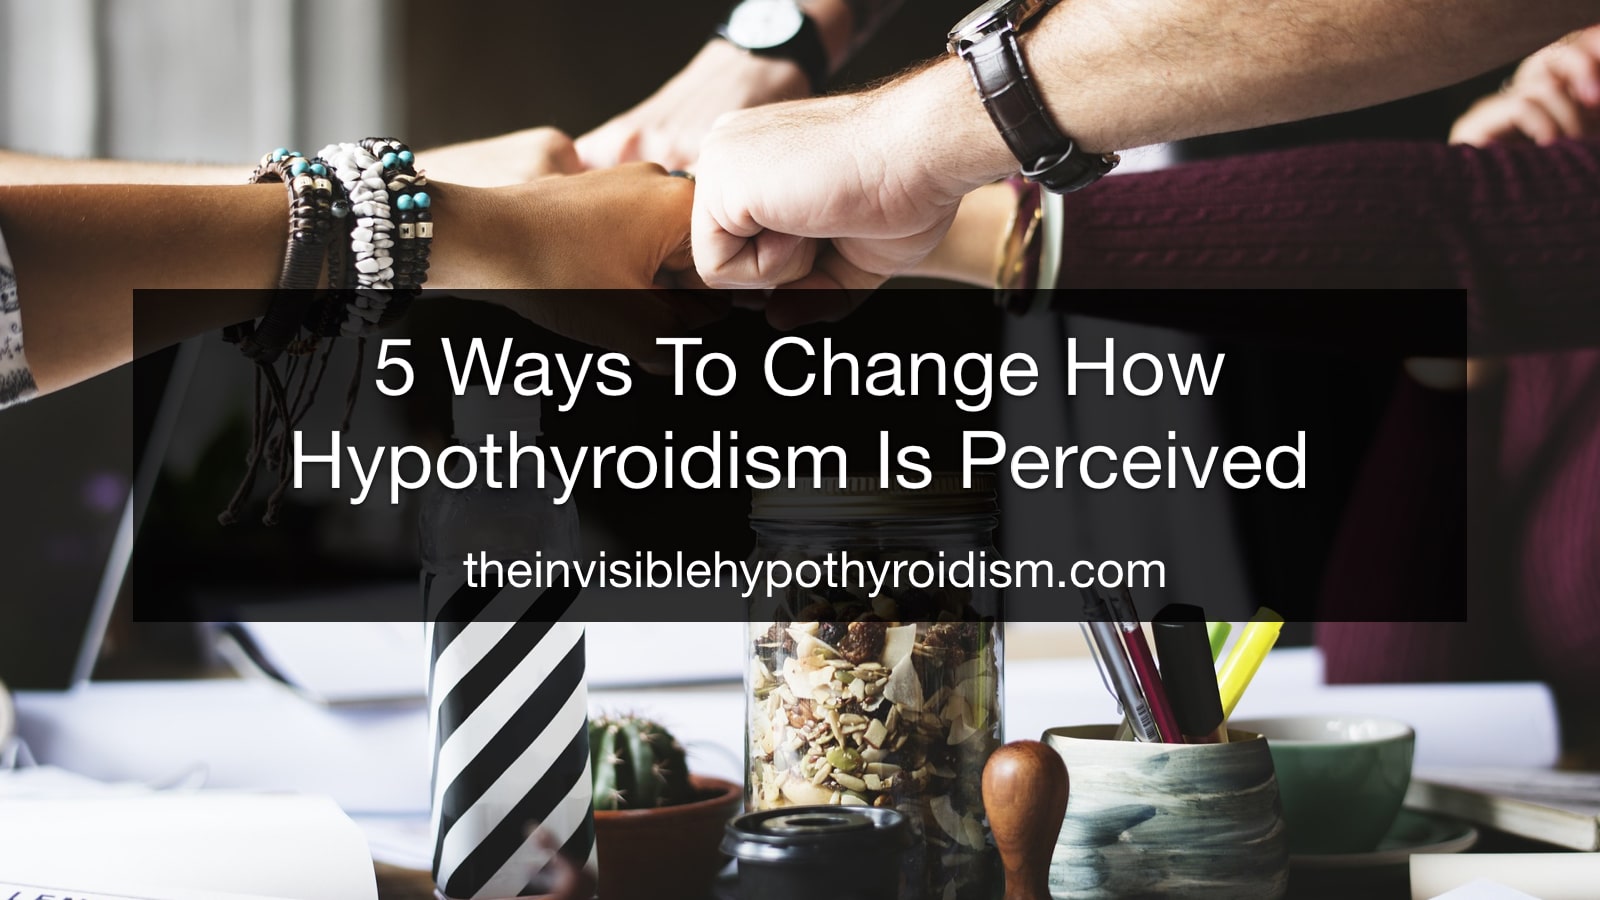 5 Ways To Change How Hypothyroidism Is Perceived